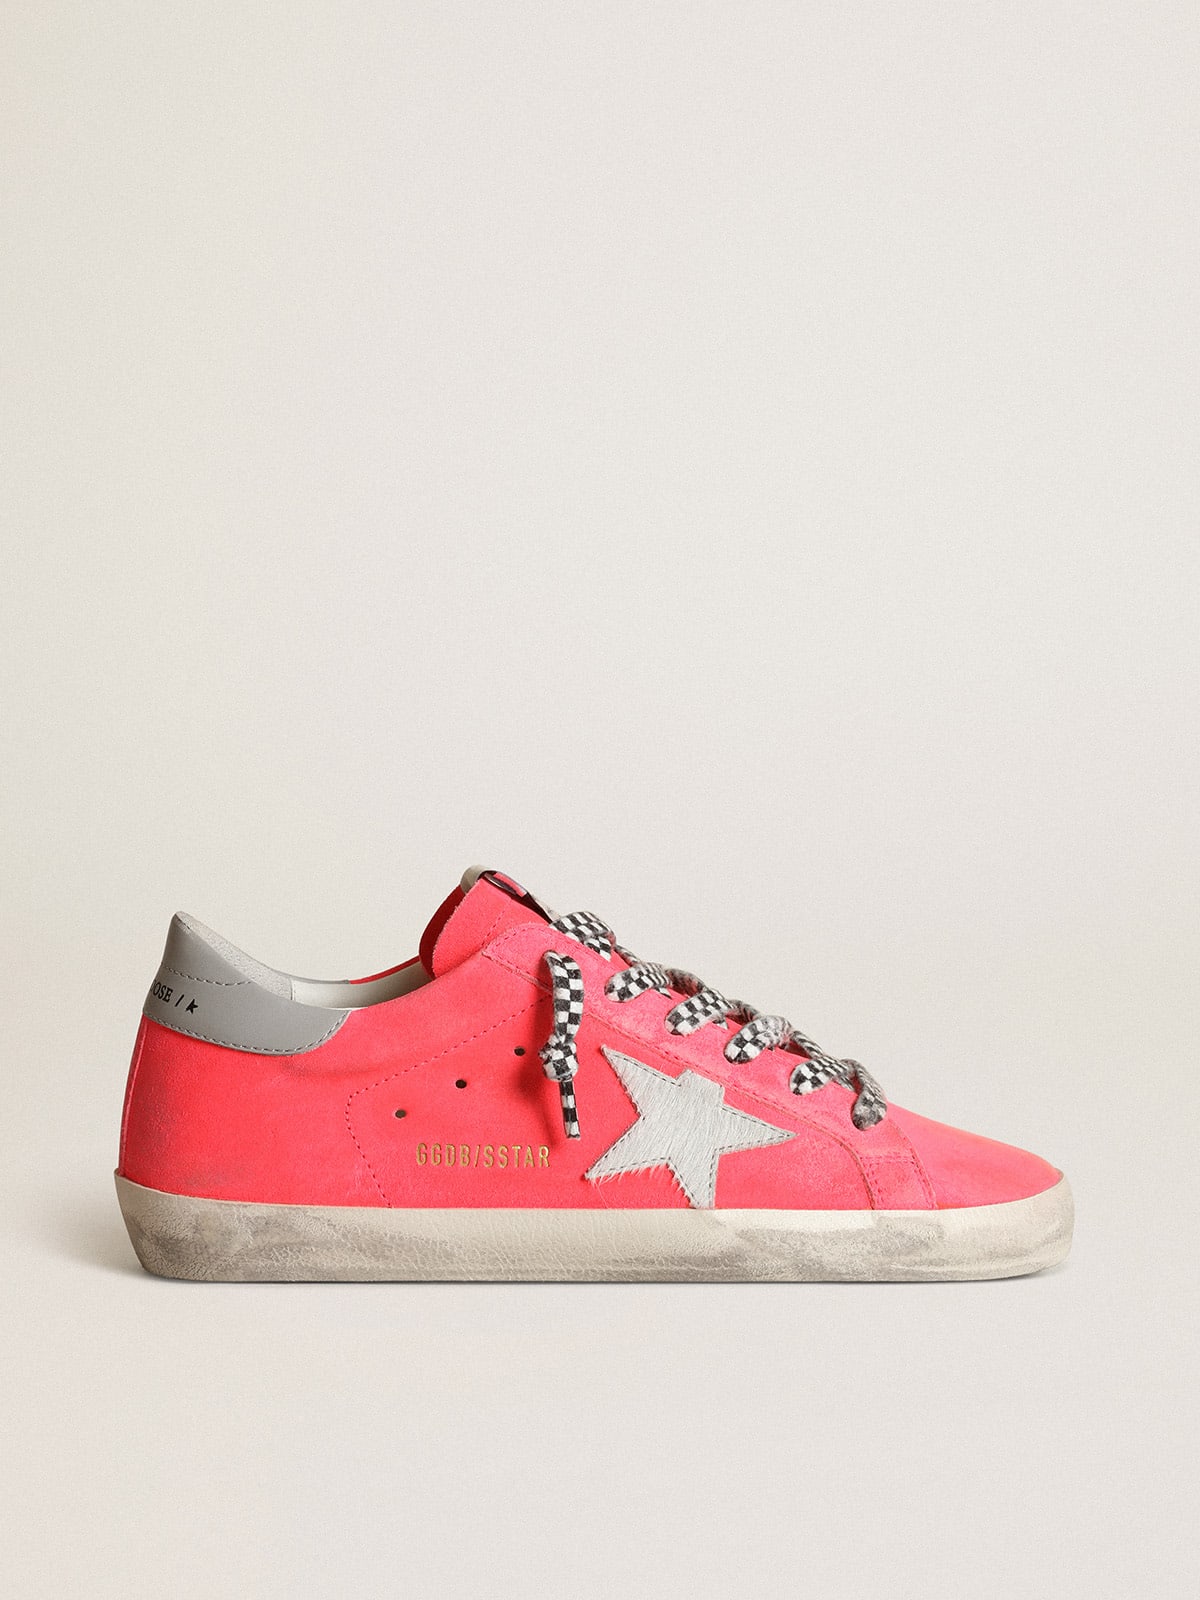 Super-Star sneakers in fluorescent lobster-colored suede with a white pony skin star